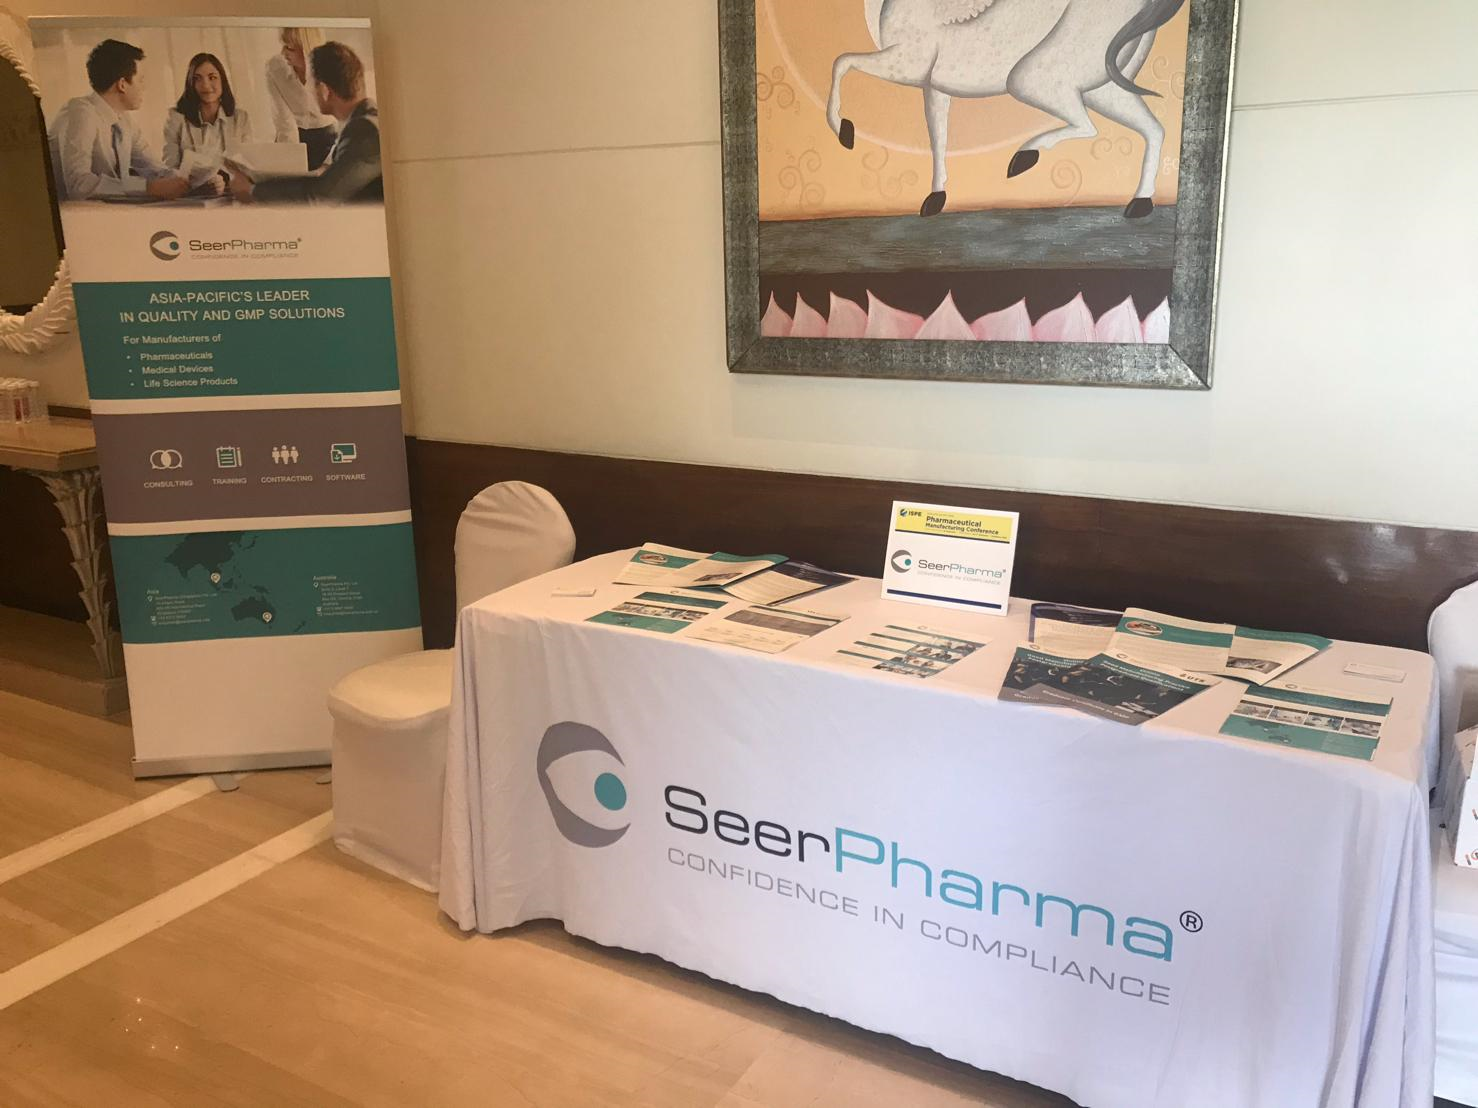 2019 ISPE South Asia Conference SeerPharma exhibition stand